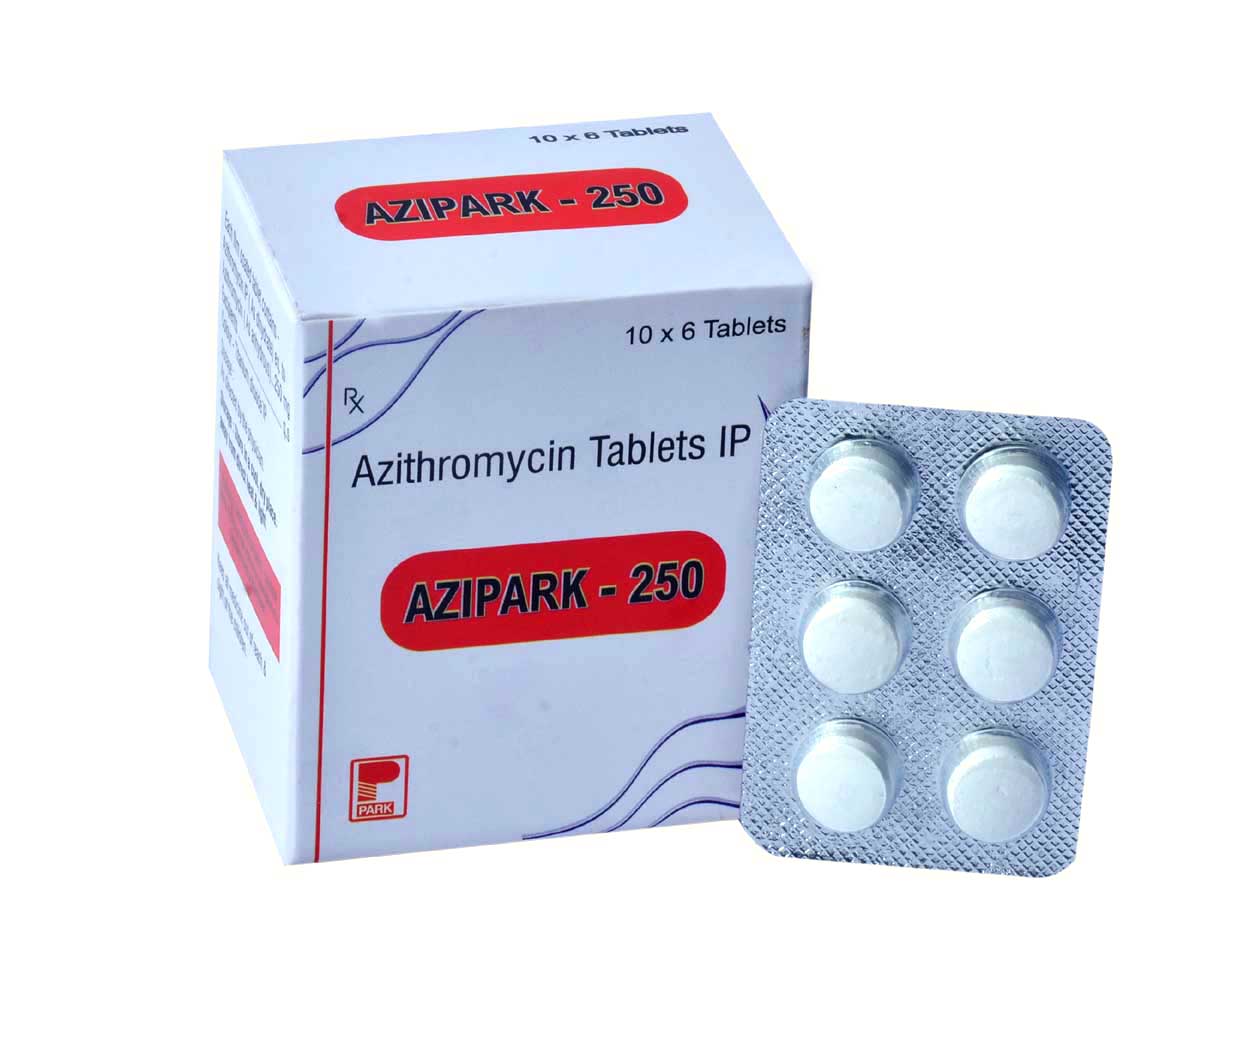 Product Name: Azipark 250, Compositions of Azipark 250 are Azithromycin Tablets IP - Park Pharmaceuticals